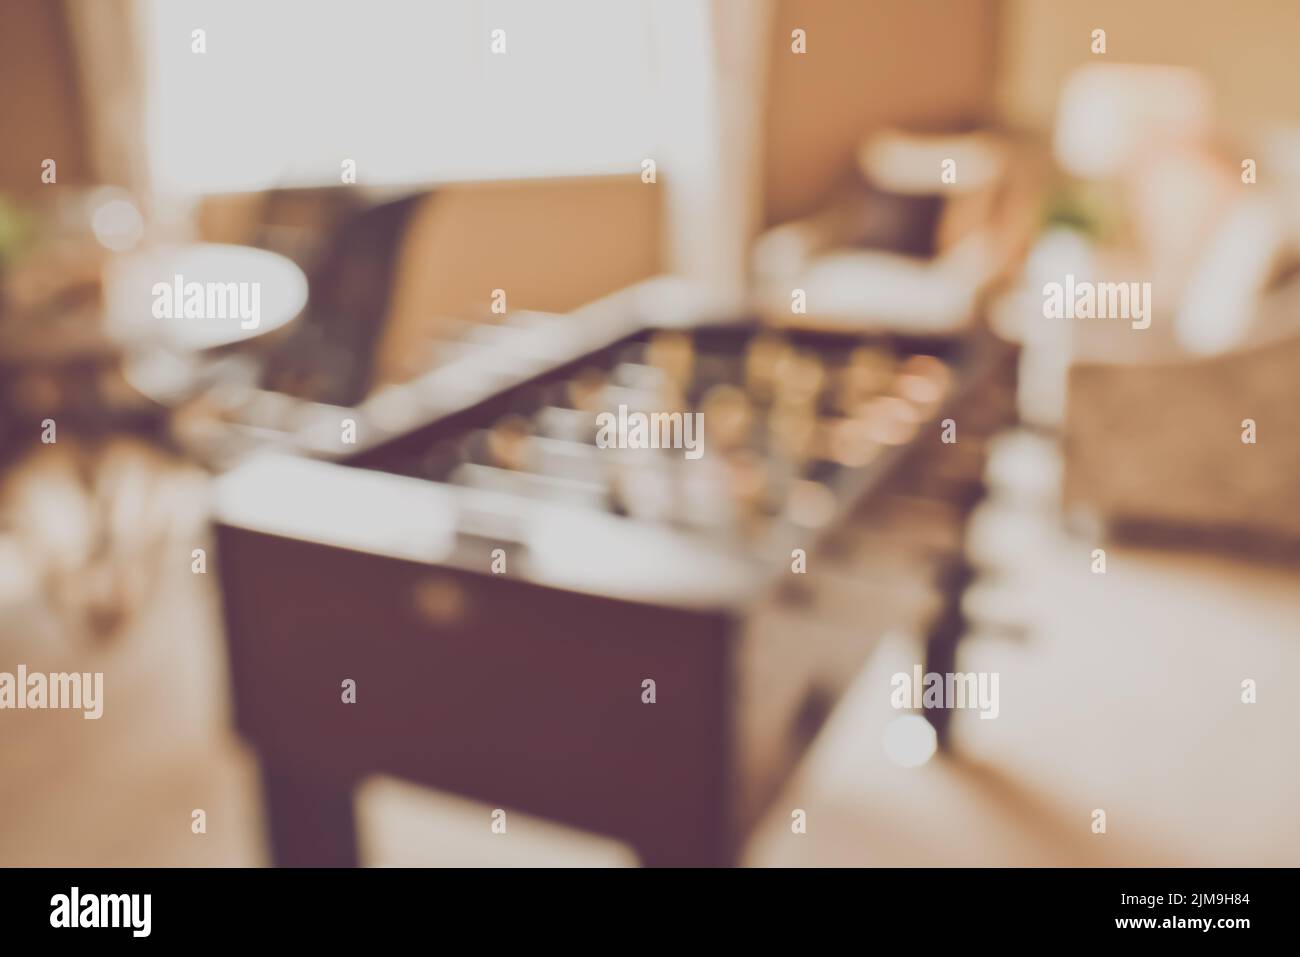 Blurred Foosball Table with vintage instagram style filter Stock Photo